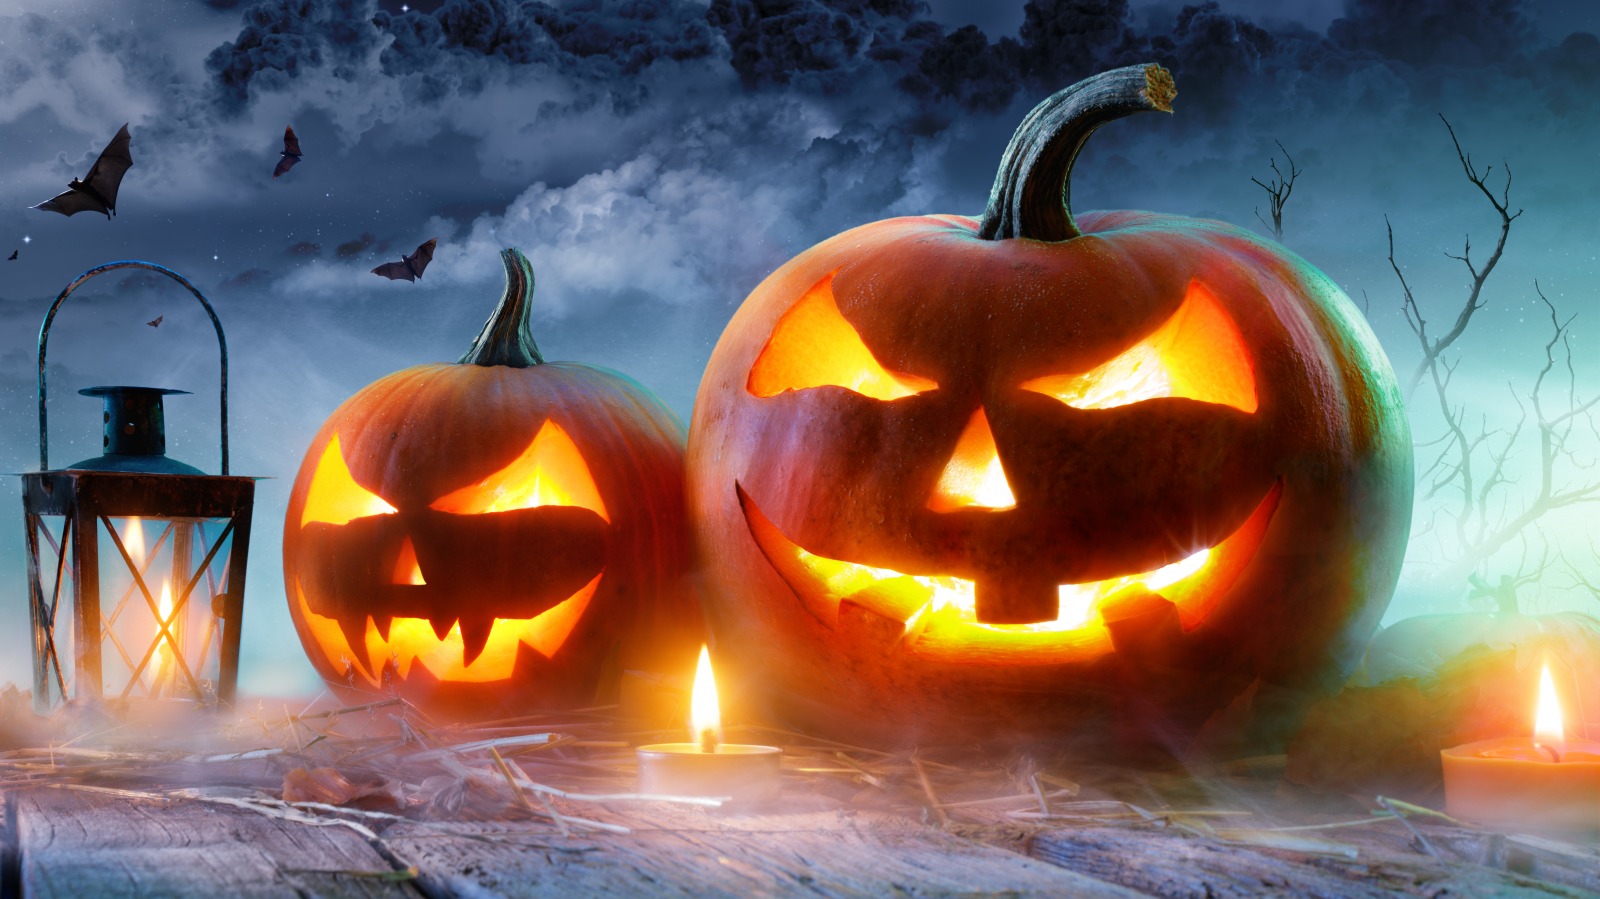 Noteworthy Historical Events That Happened On Halloween